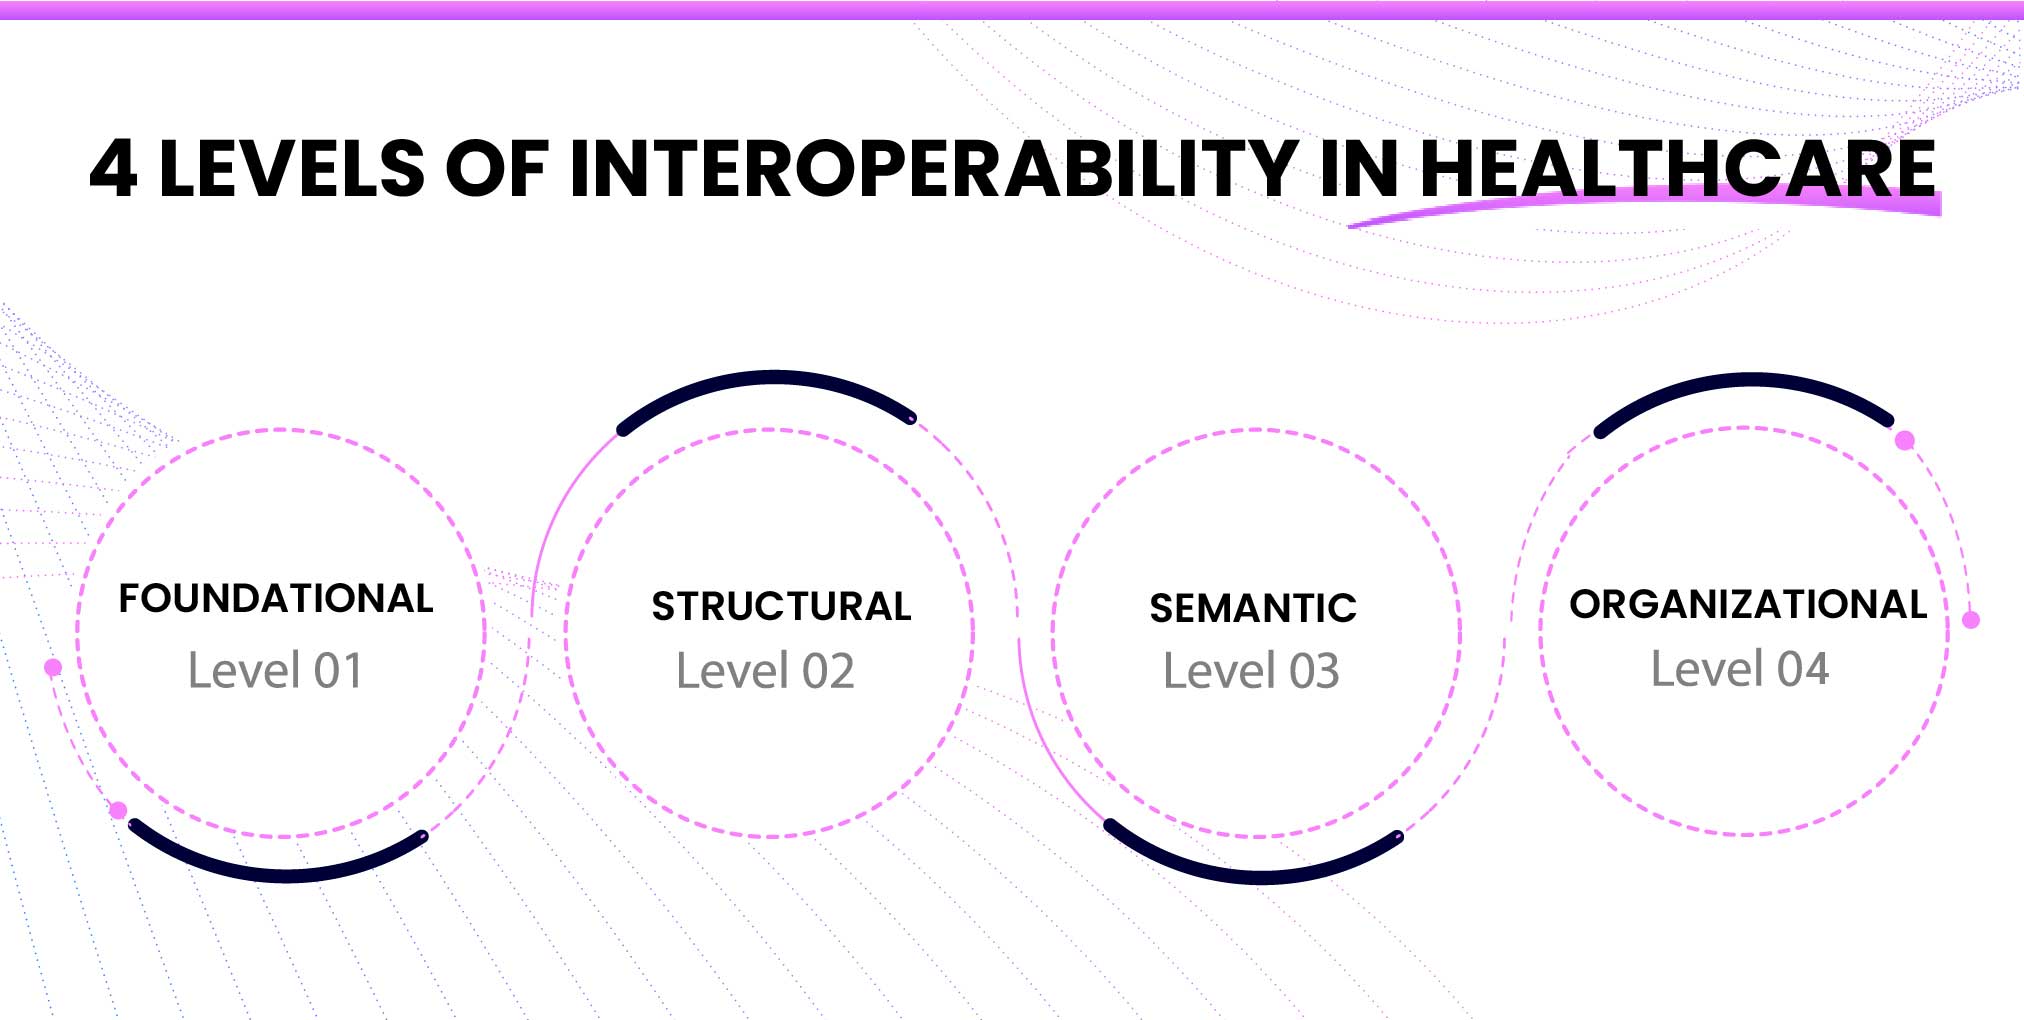 4 Levels of Interoperability in Healthcare
